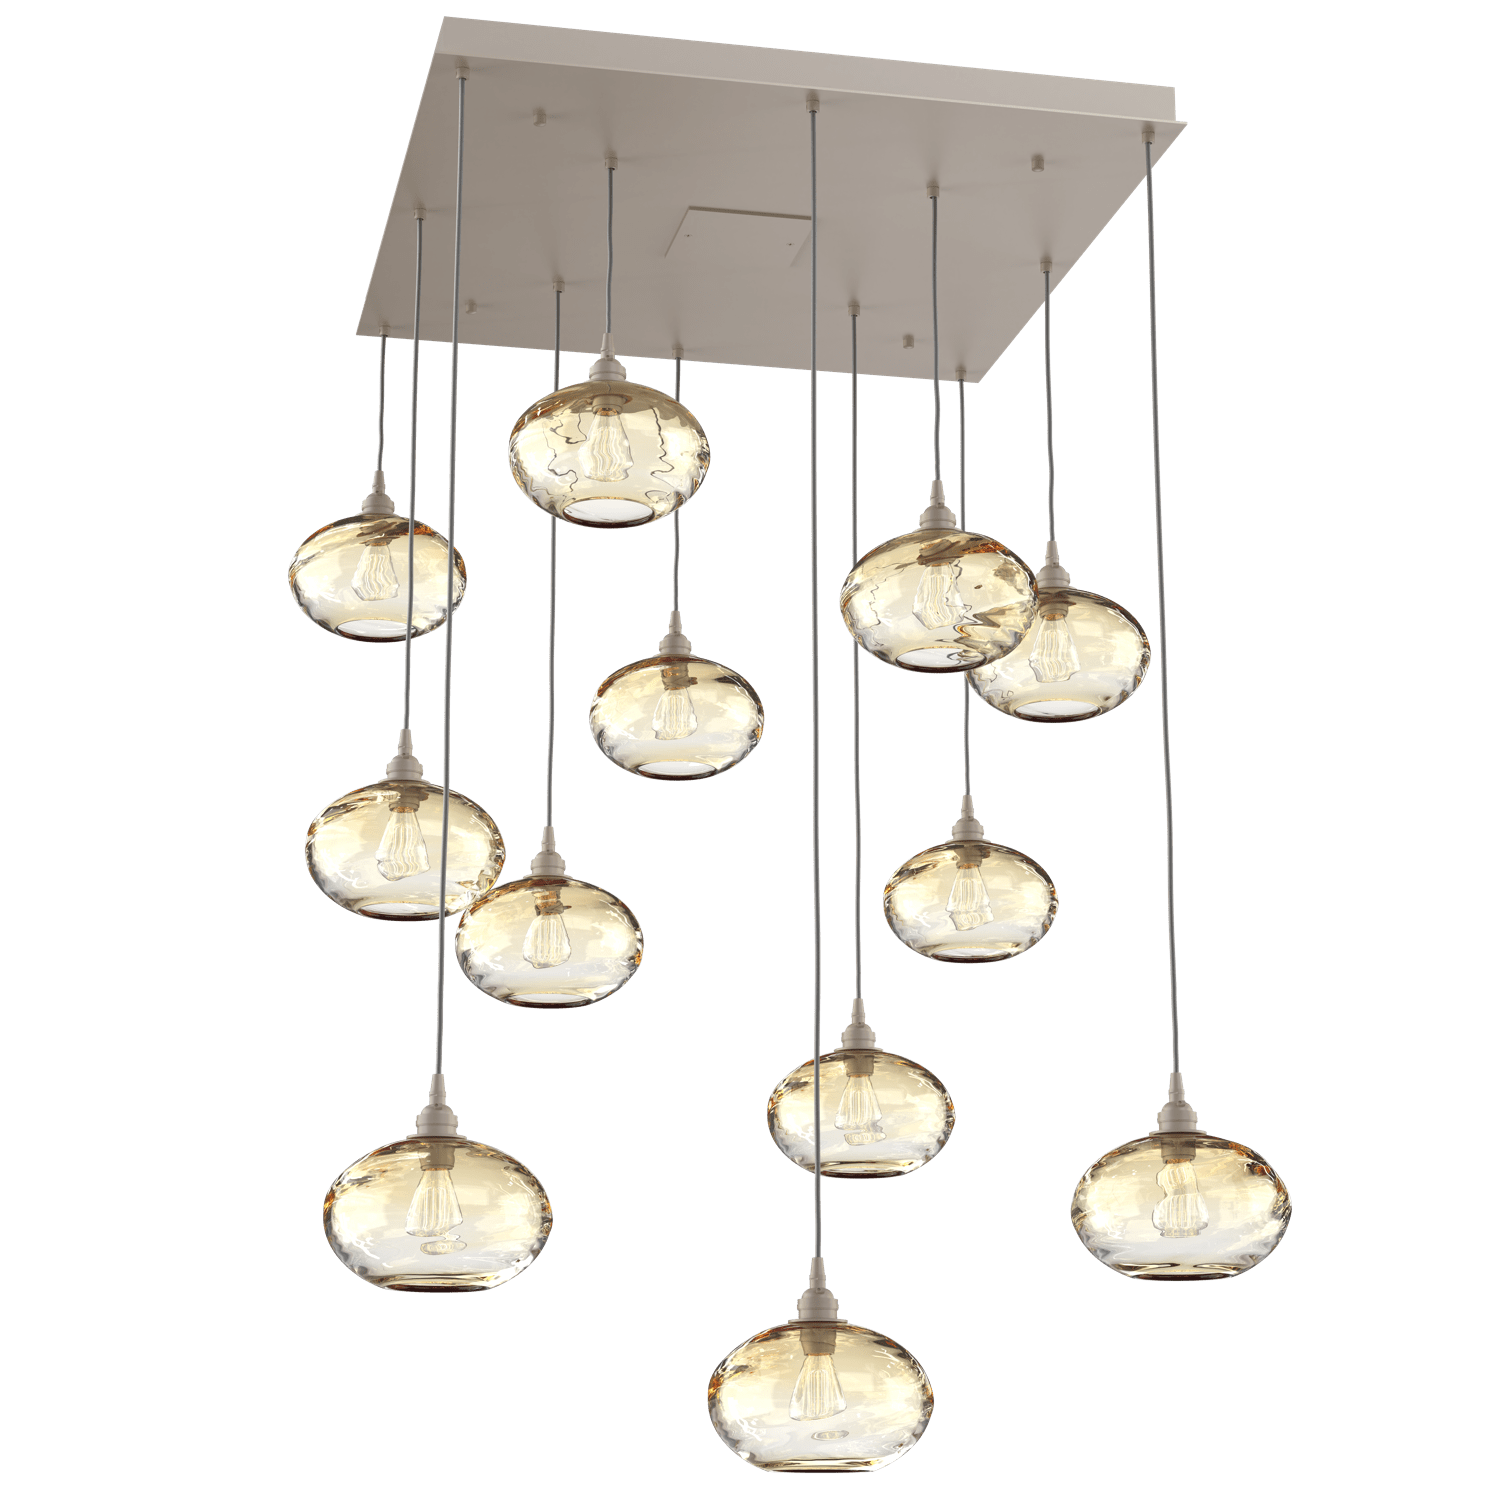 CHB0036-12-BS-OA-Hammerton-Studio-Optic-Blown-Glass-Coppa-12-light-square-pendant-chandelier-with-metallic-beige-silver-finish-and-optic-amber-blown-glass-shades-and-incandescent-lamping